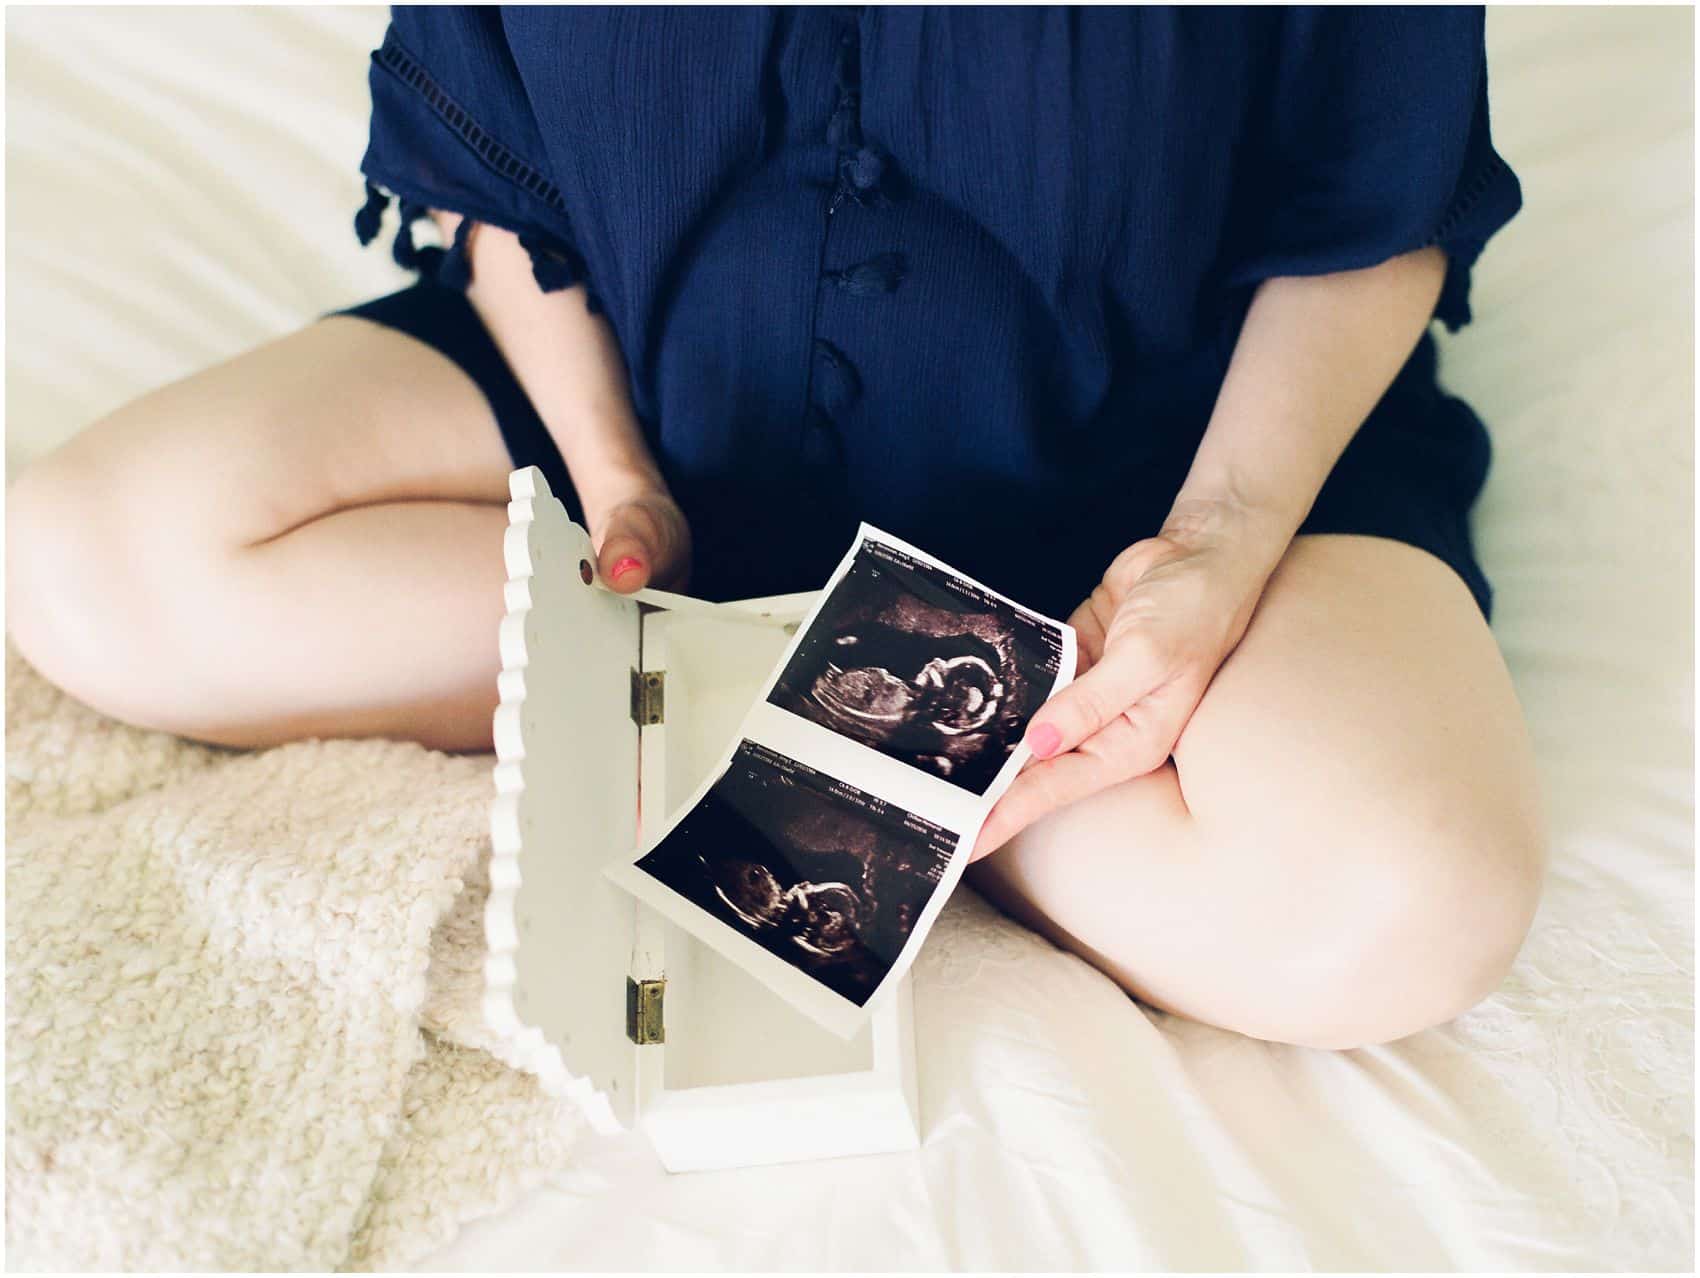 mom to be holding her baby's ultrasound photos and wearing a blue maternity dress